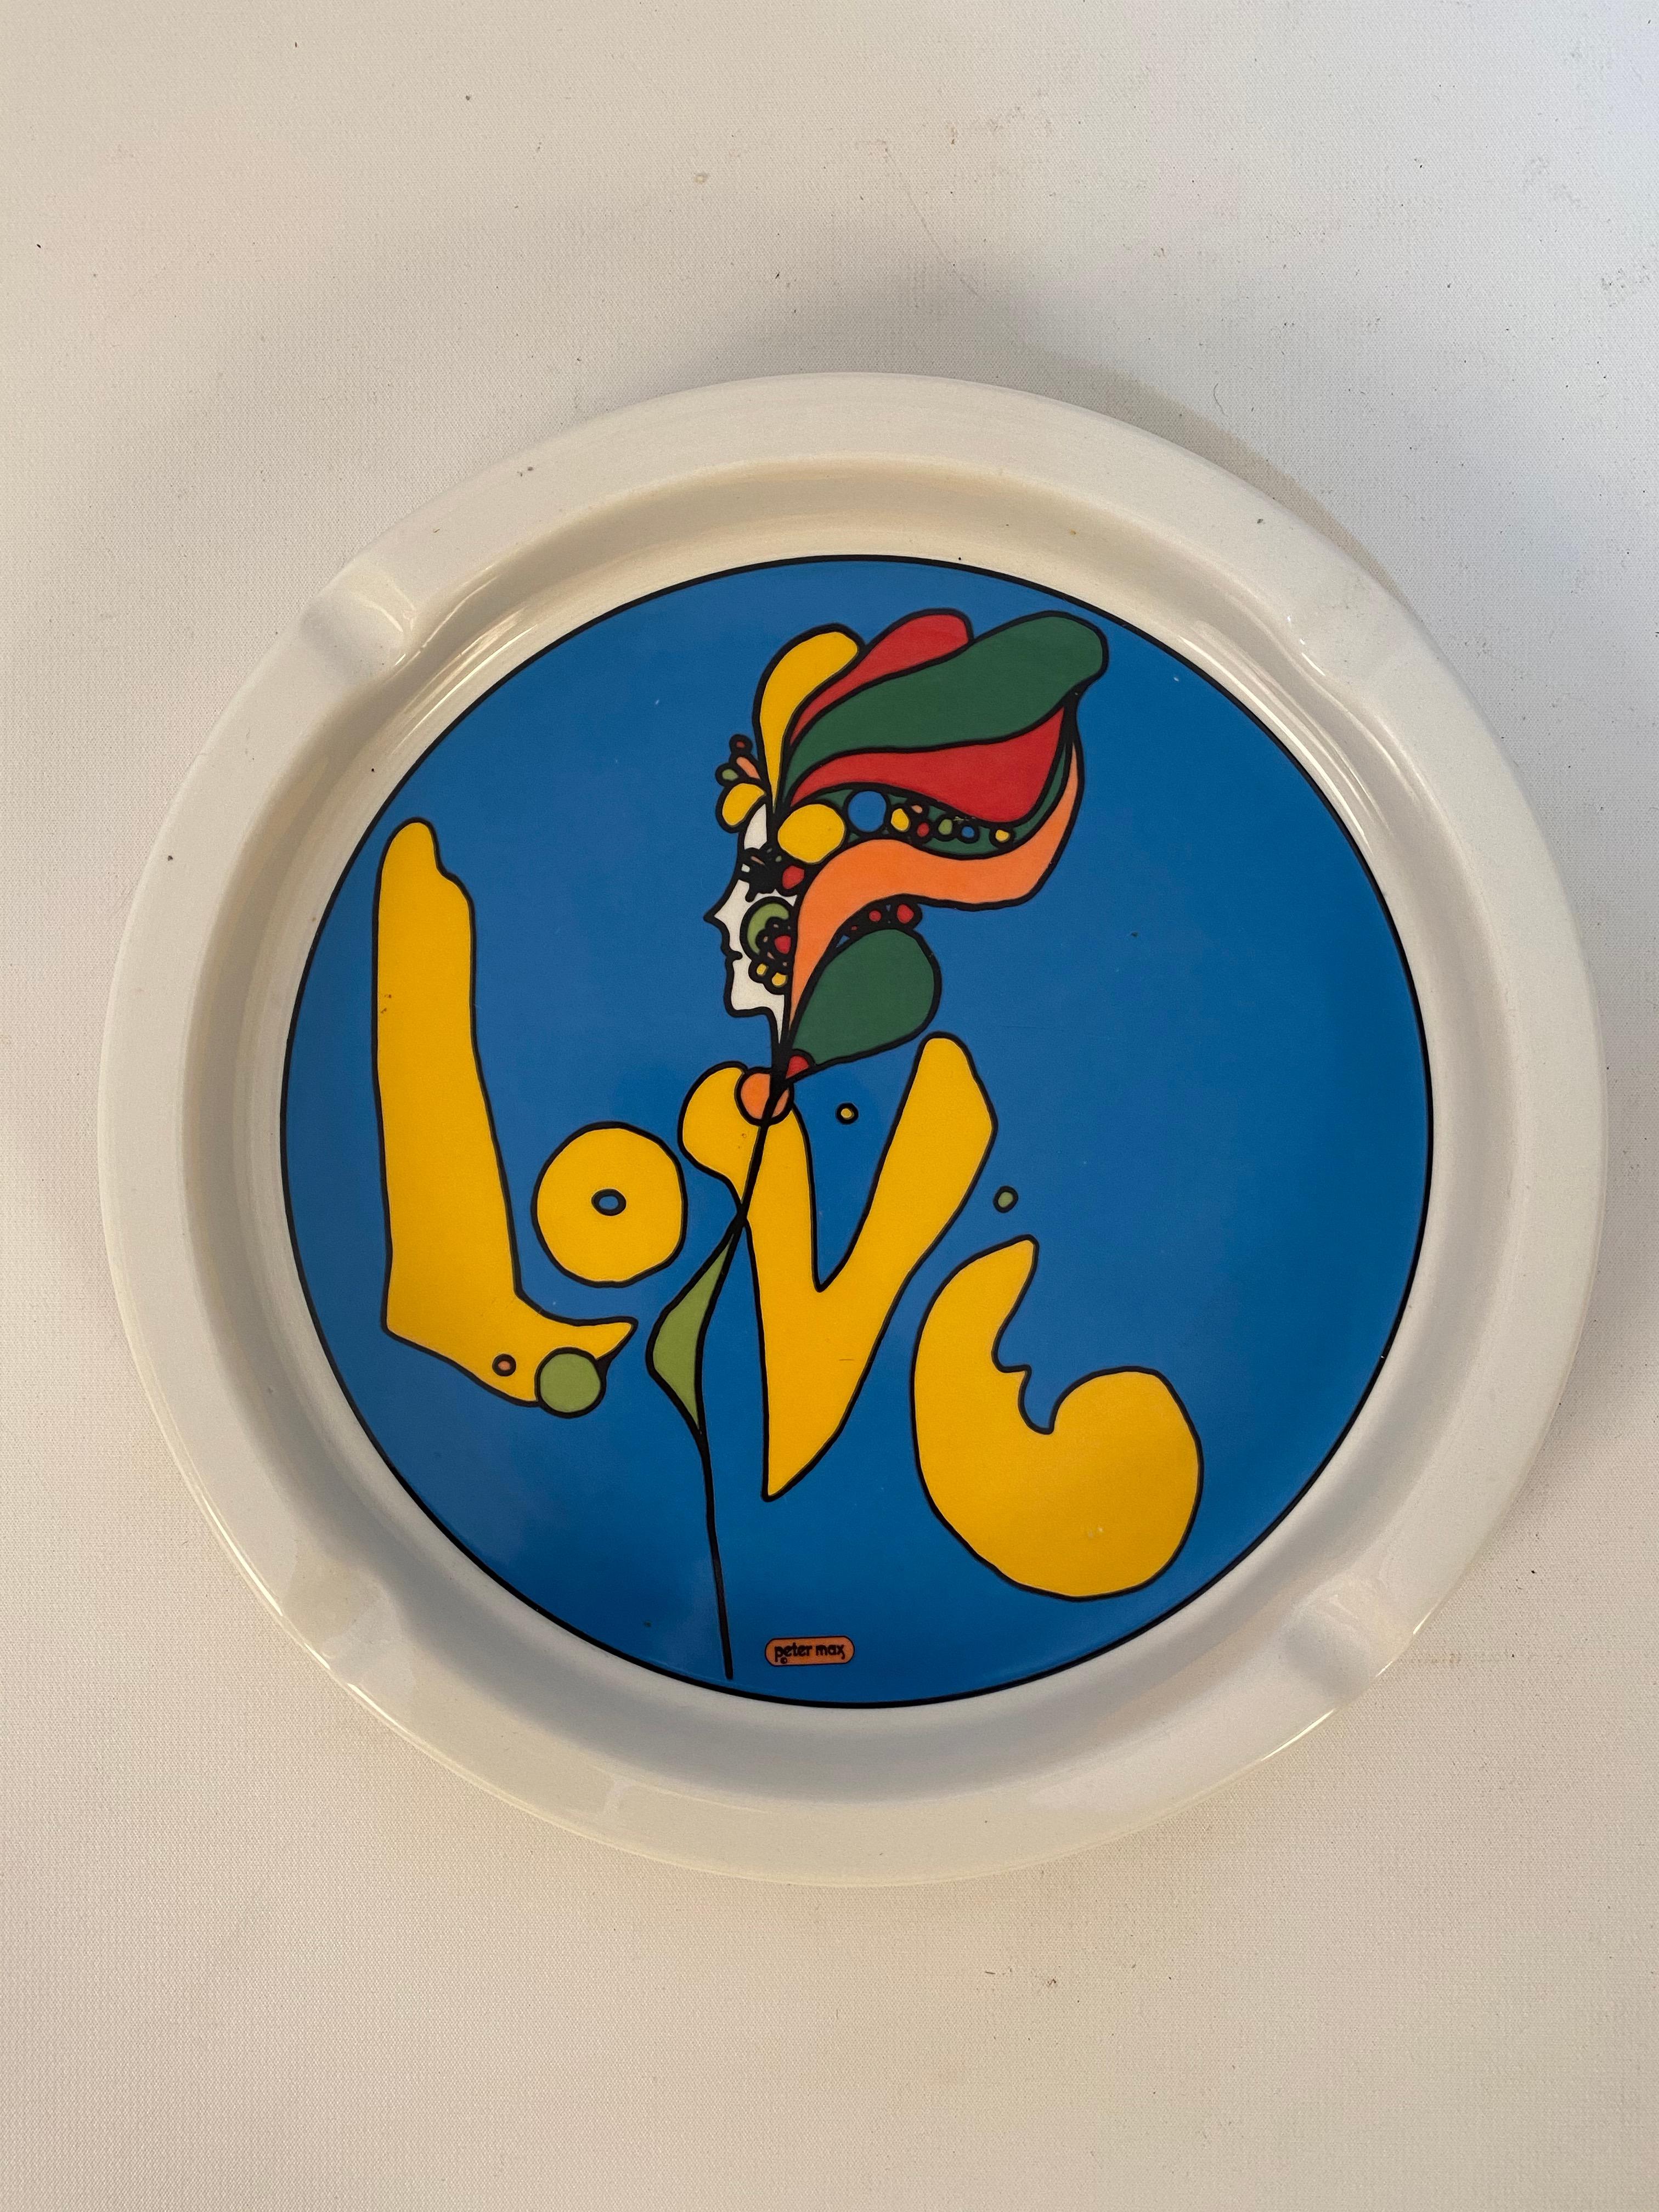 Peter Max's psychedelic 1960s Love ashtray by Iroquois China, Syracuse, NY. Wonderful vibrant transfer decorated image. Very little wear or use and in amazing condition; no chips, cracks, hairlines or cigarette butt burns. Signed on